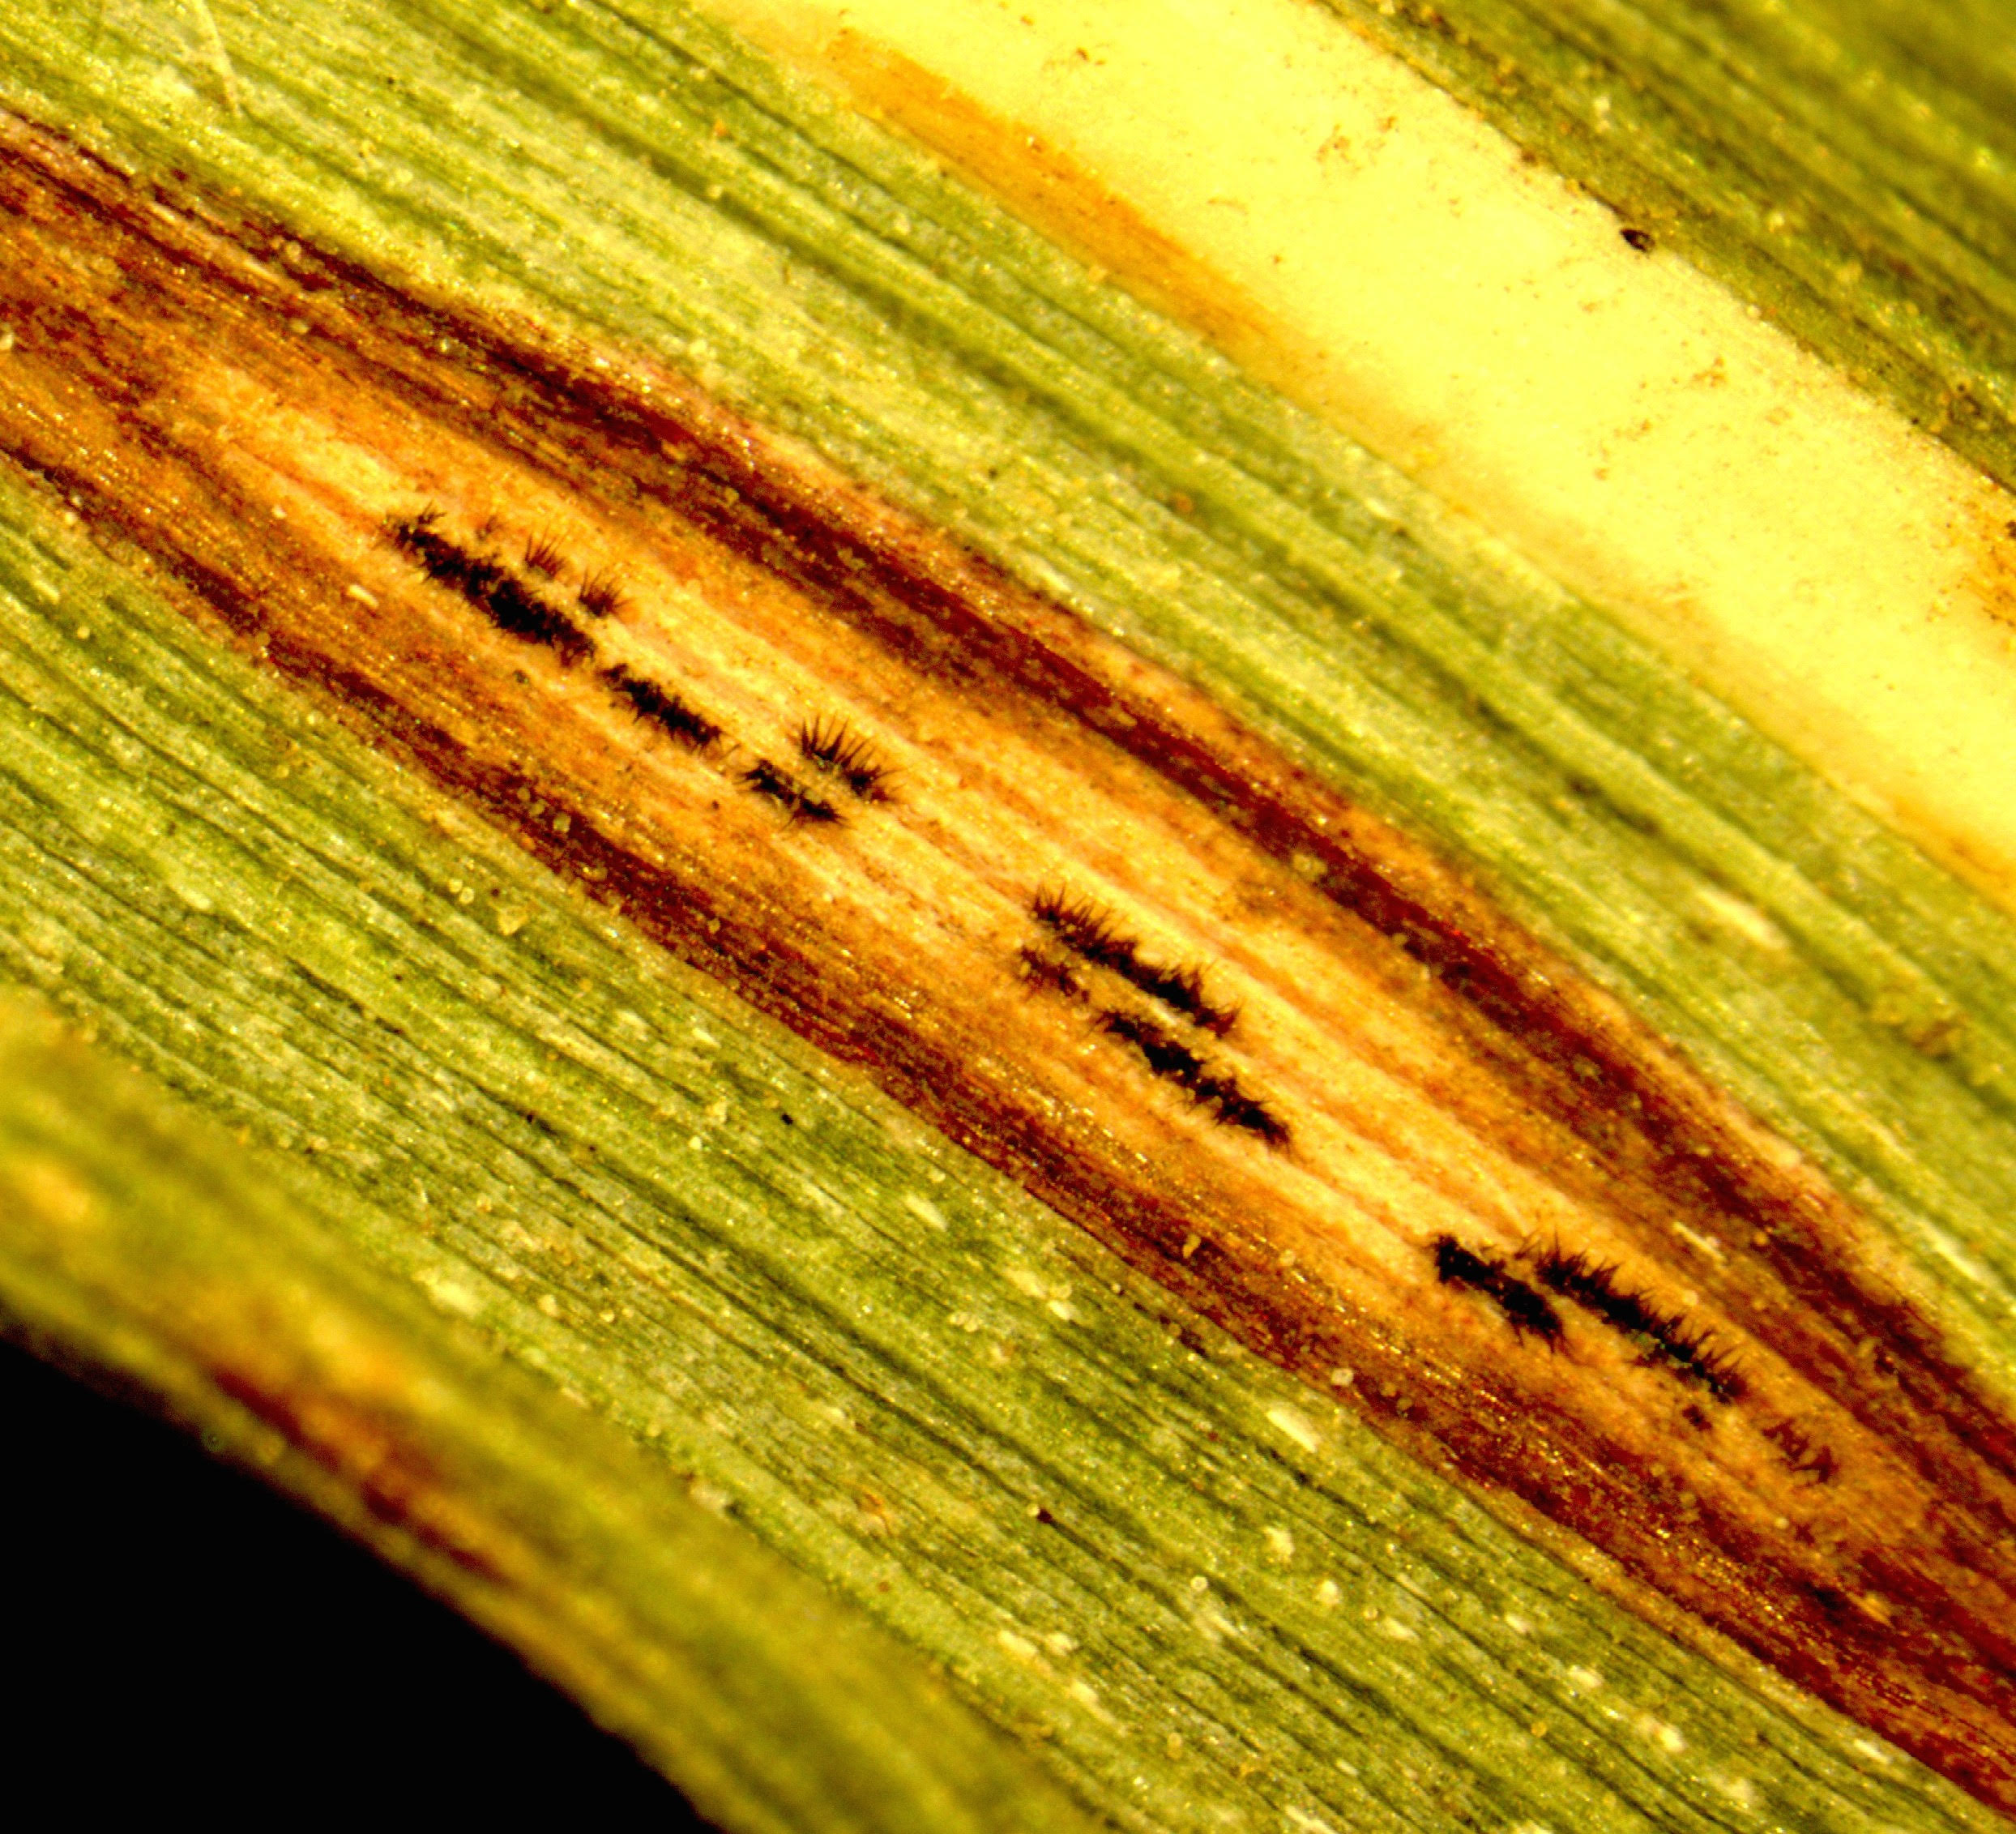 Anthracnose on switchgrass caused by Colletotrichum. Image Credit: Jo Anne Crouch.